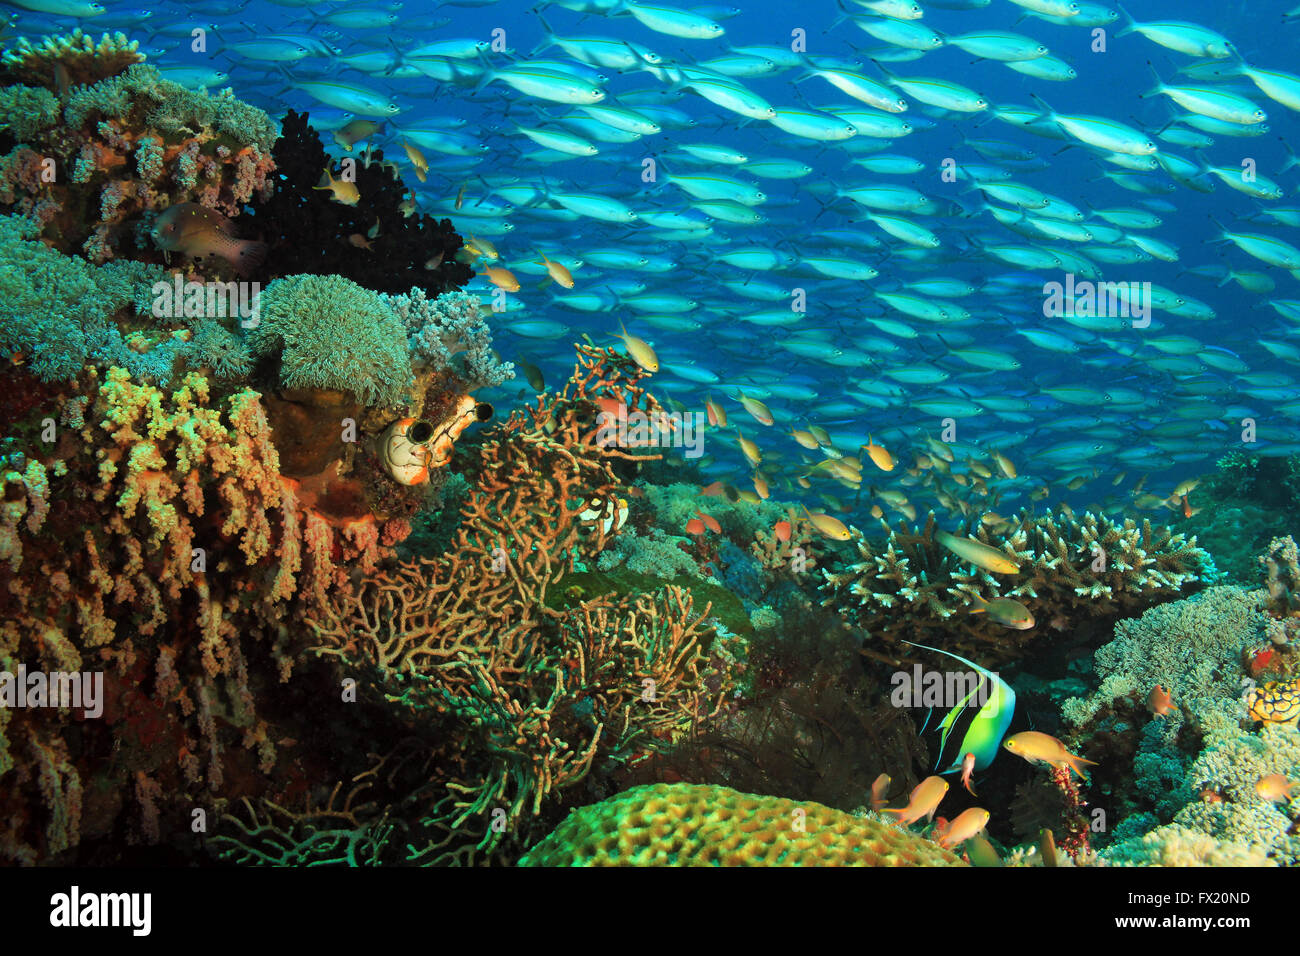 Schooling Fusiliers over a Colorful Coral Reef. Gam, Raja Ampat, Indonesia Stock Photo